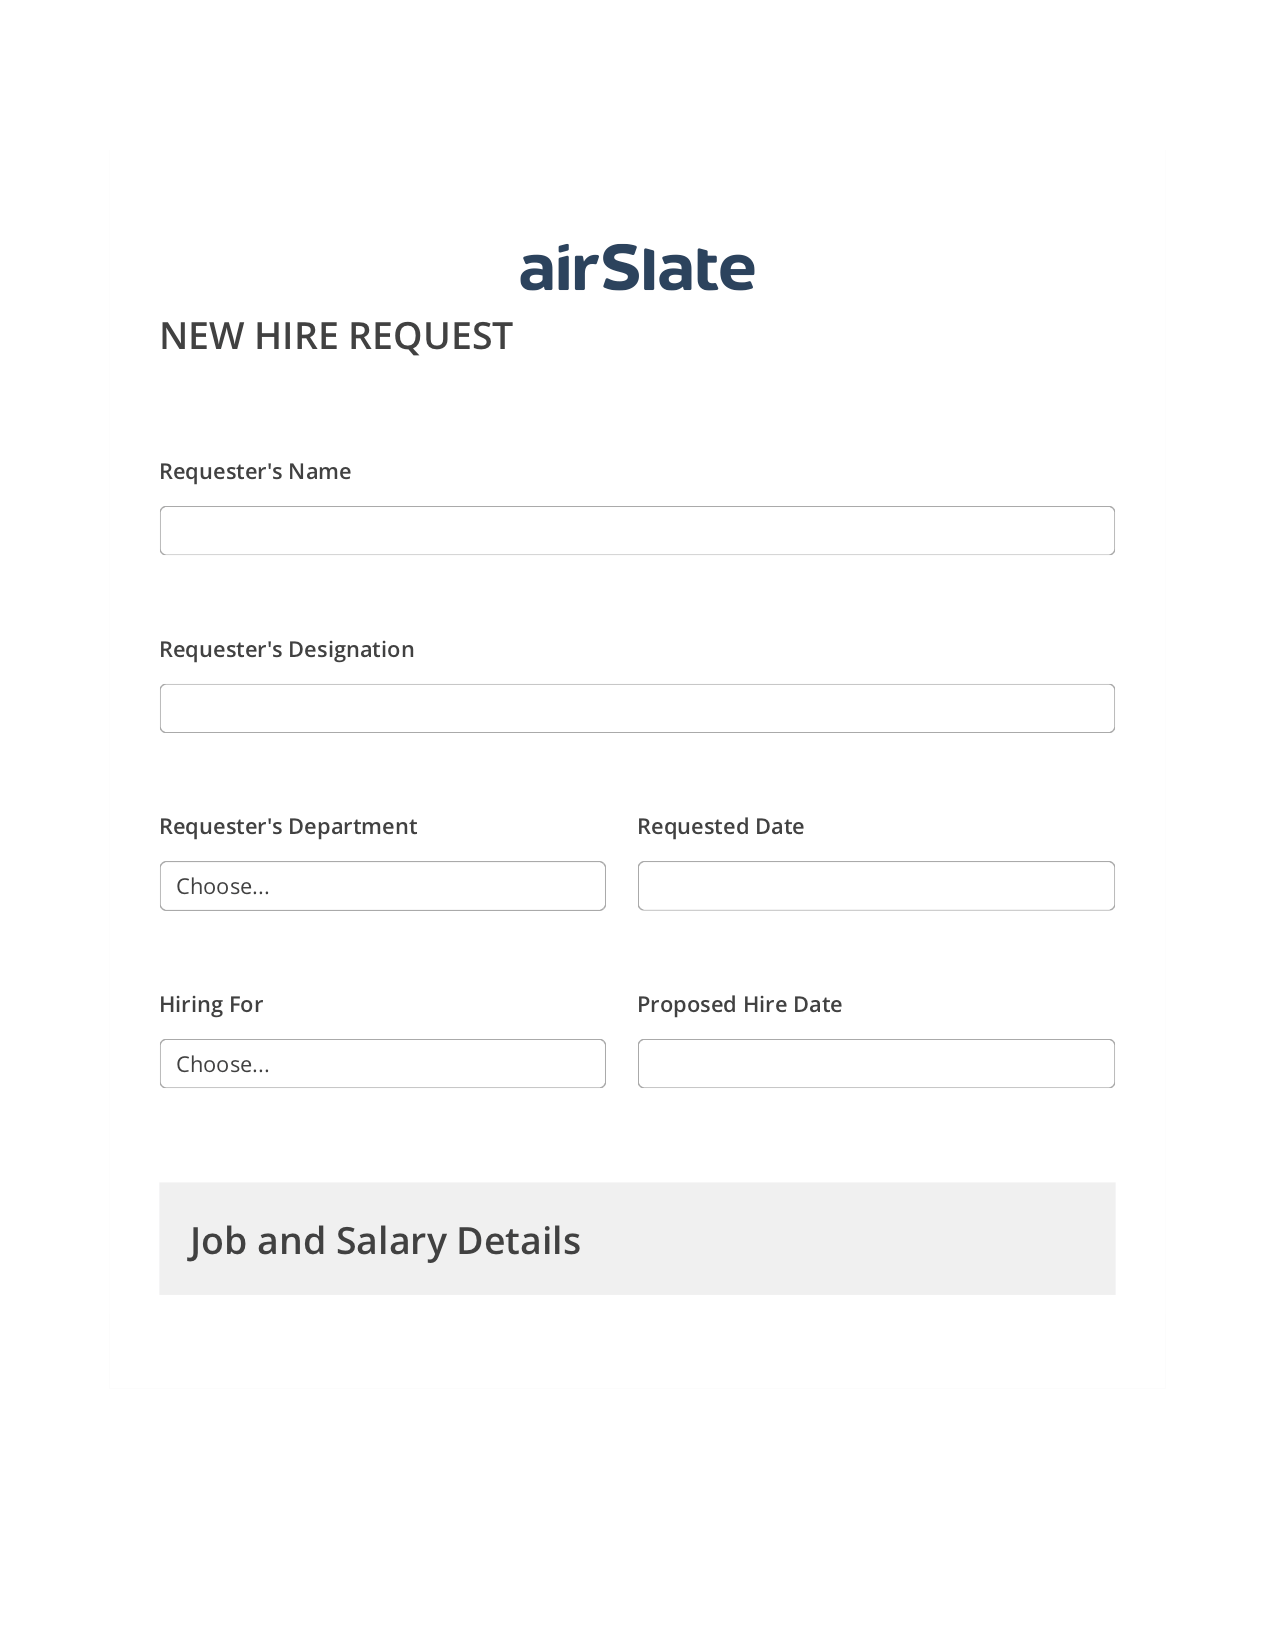 Hiring Request Workflow Pre-fill from Google Sheets Bot, Webhook Bot, Archive to OneDrive Bot